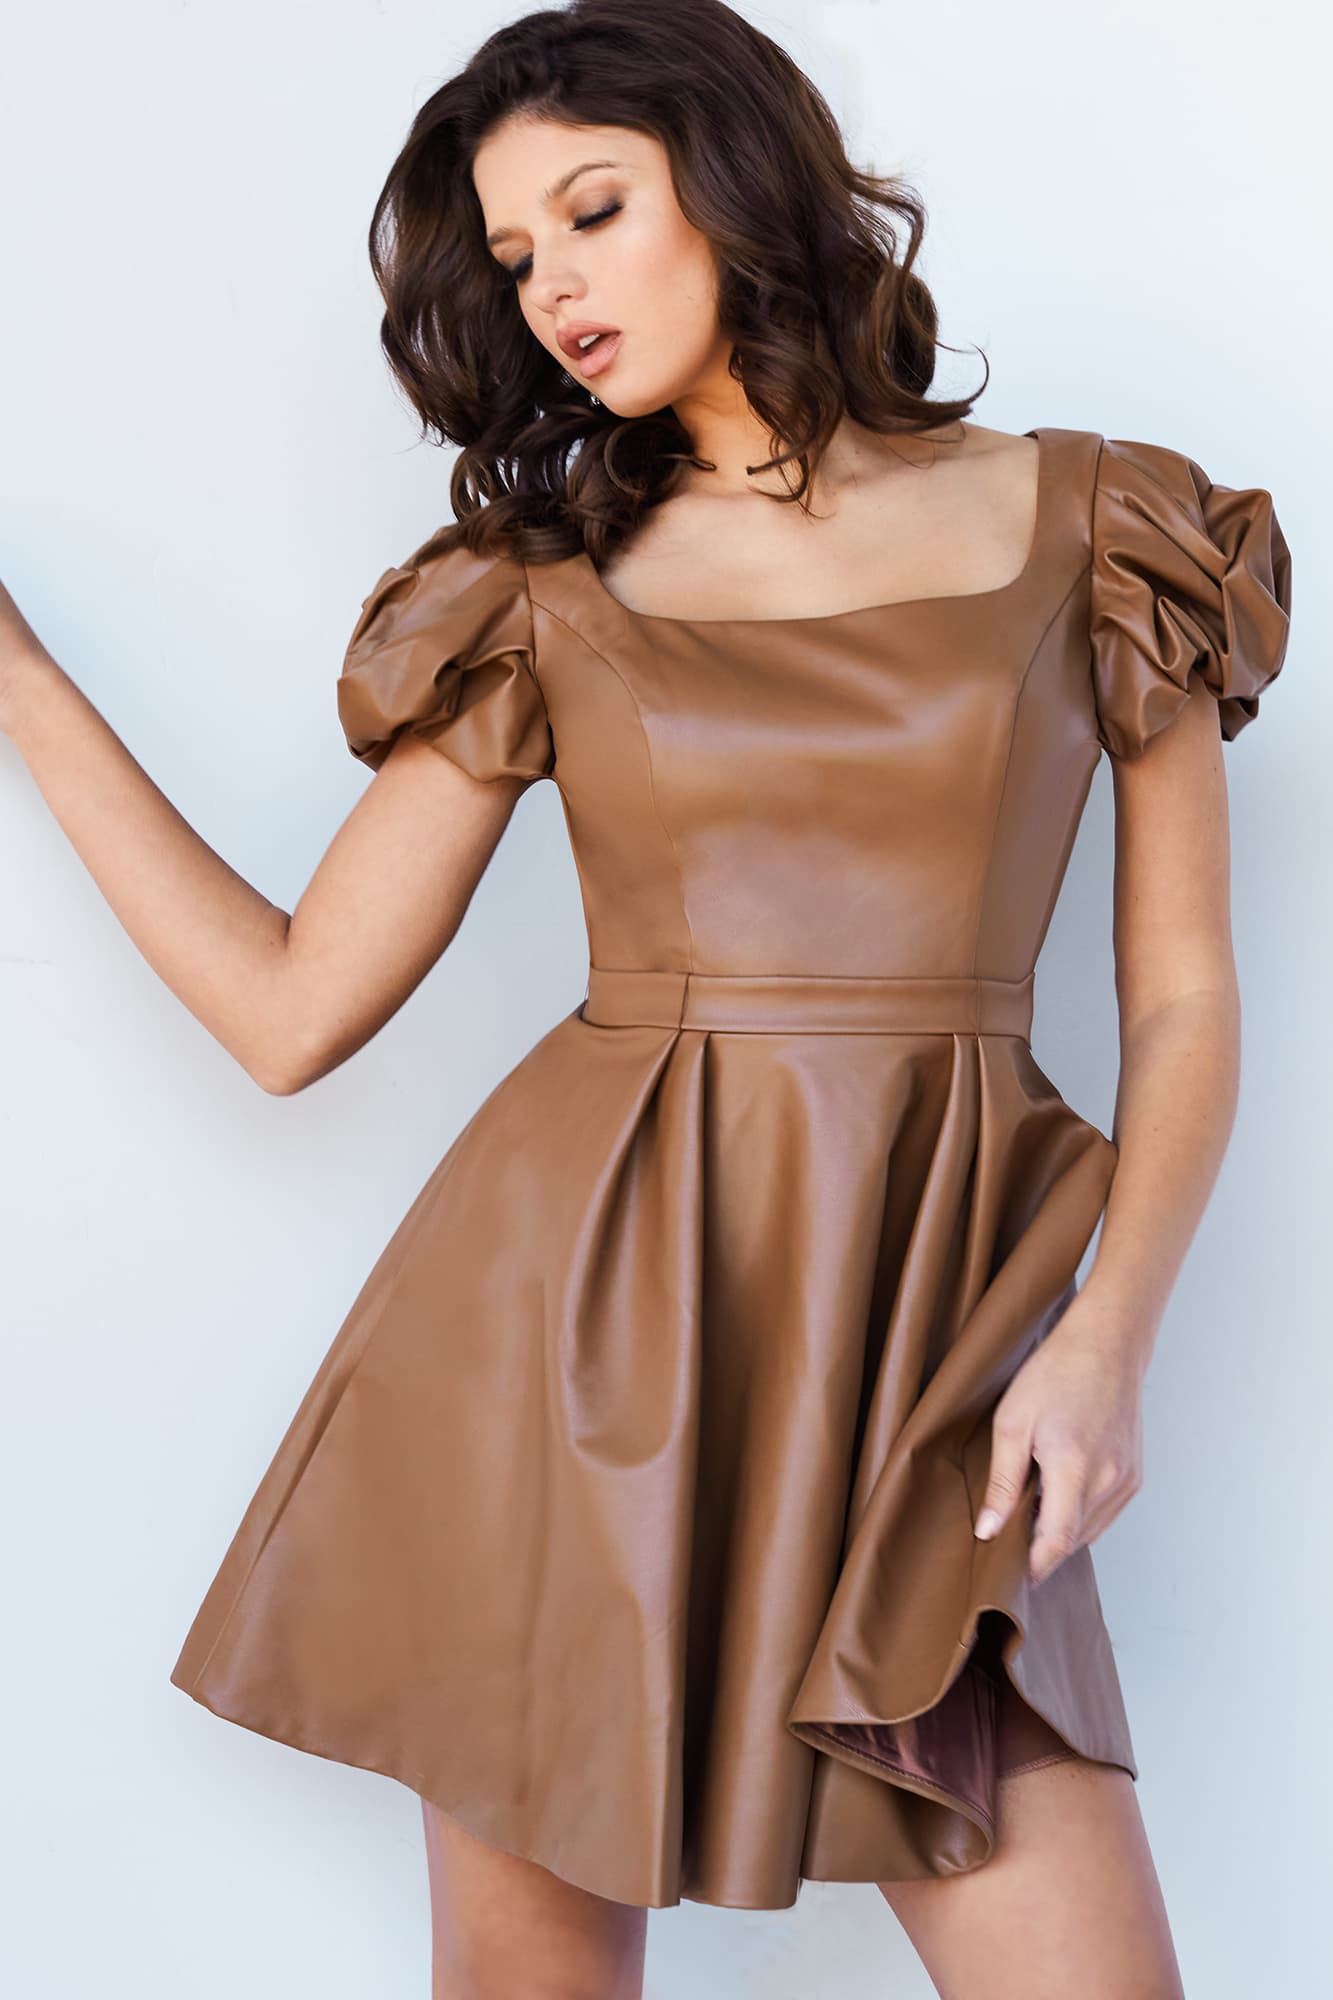 Jovani 09690 Short Fit & Flare Pleather Cutout Back Puff Sleeve Formal Cocktail Dress Interview This Jovani 09690 caramel cocktail dress features an A-line silhouette in premium pleather, with a square neckline, puff sleeves, and a lower back cutout.  Available Sizes: 00,0,2,4,6,8,10,12,14,16,18,20,22,24  Available Colors: Black, Caramel, Olive